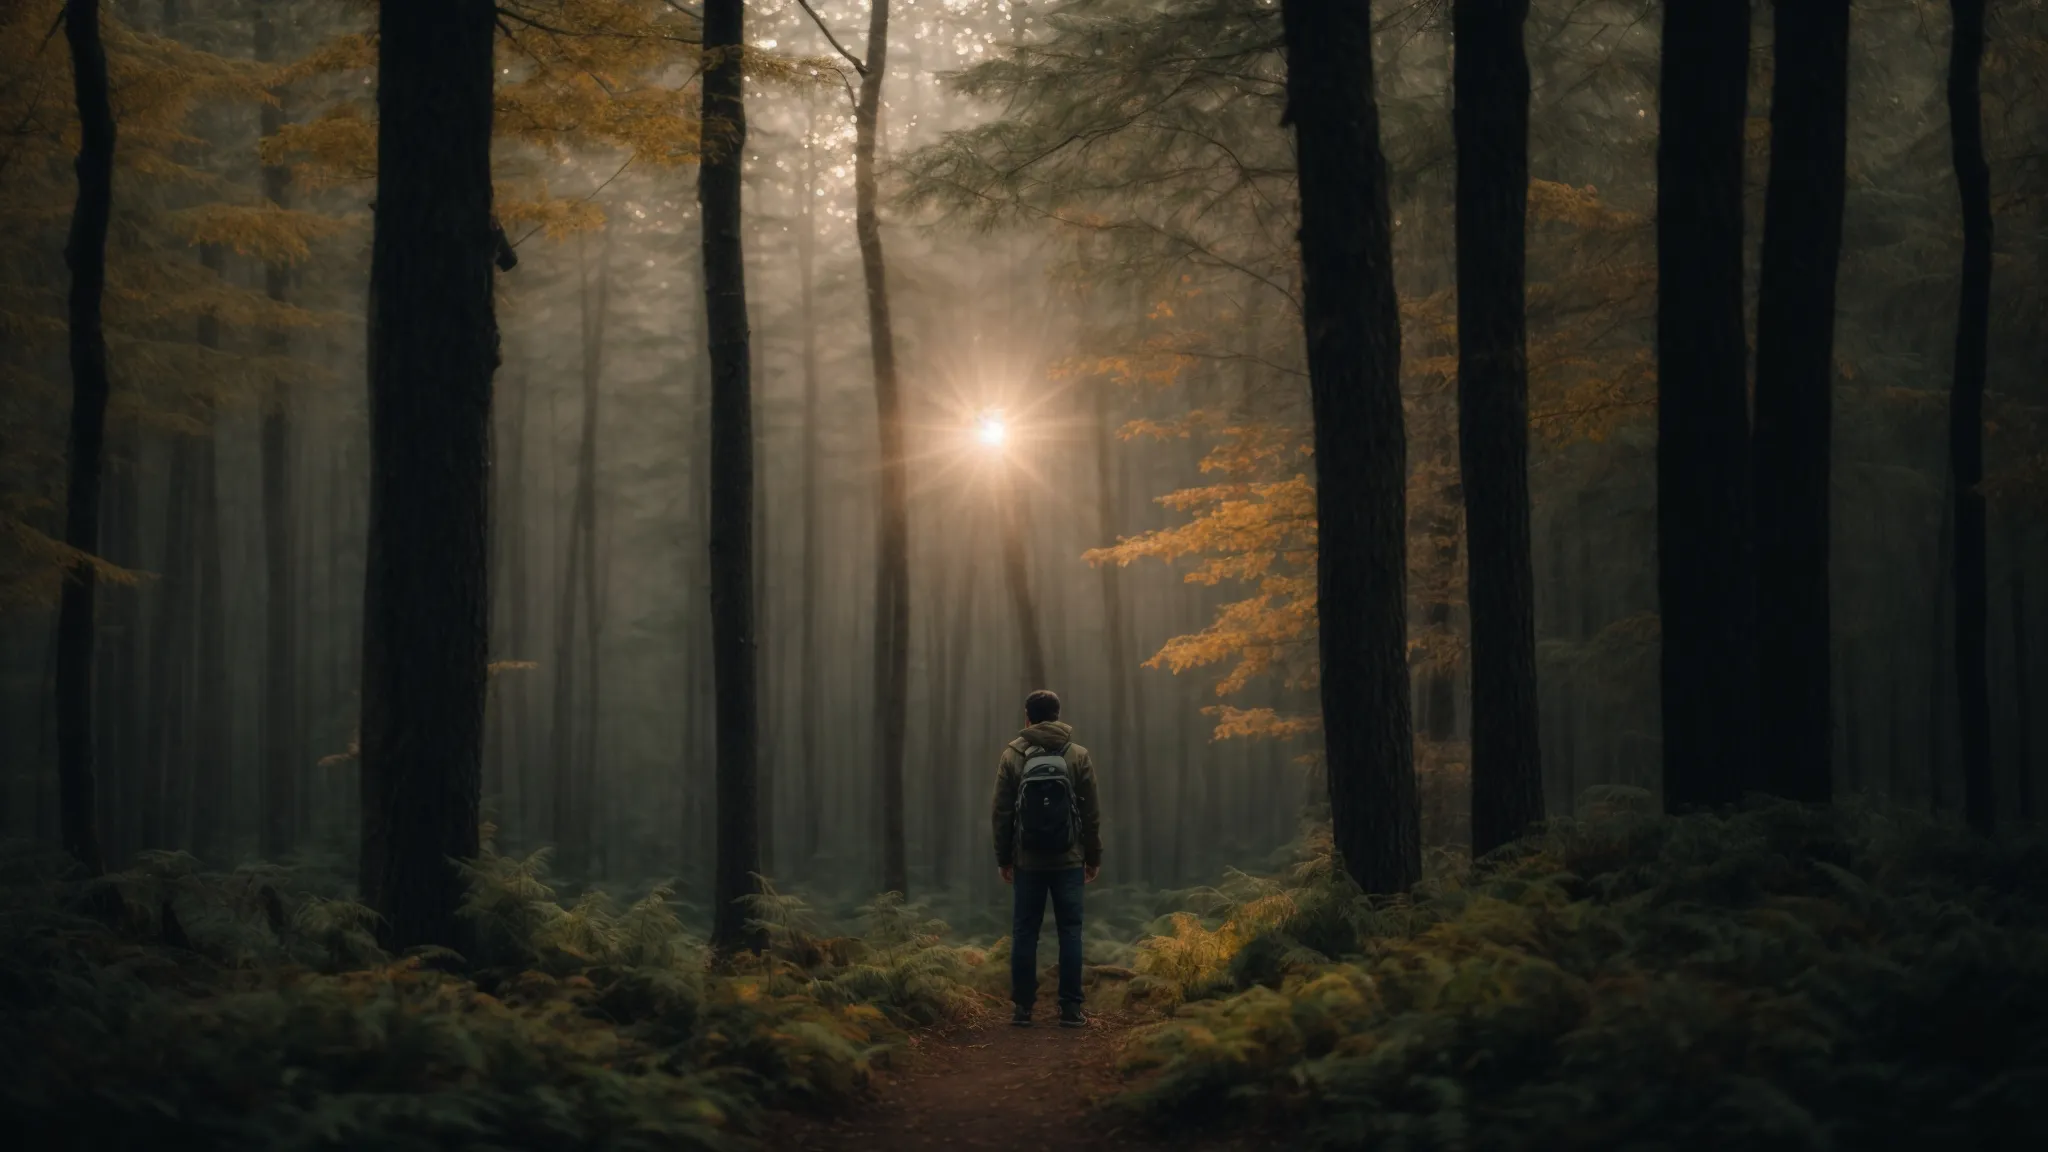 a person with a compass in hand stands at the forest's edge, gazing into the dense woodland, with a path illuminated by a faint glow leading into the heart of the trees.